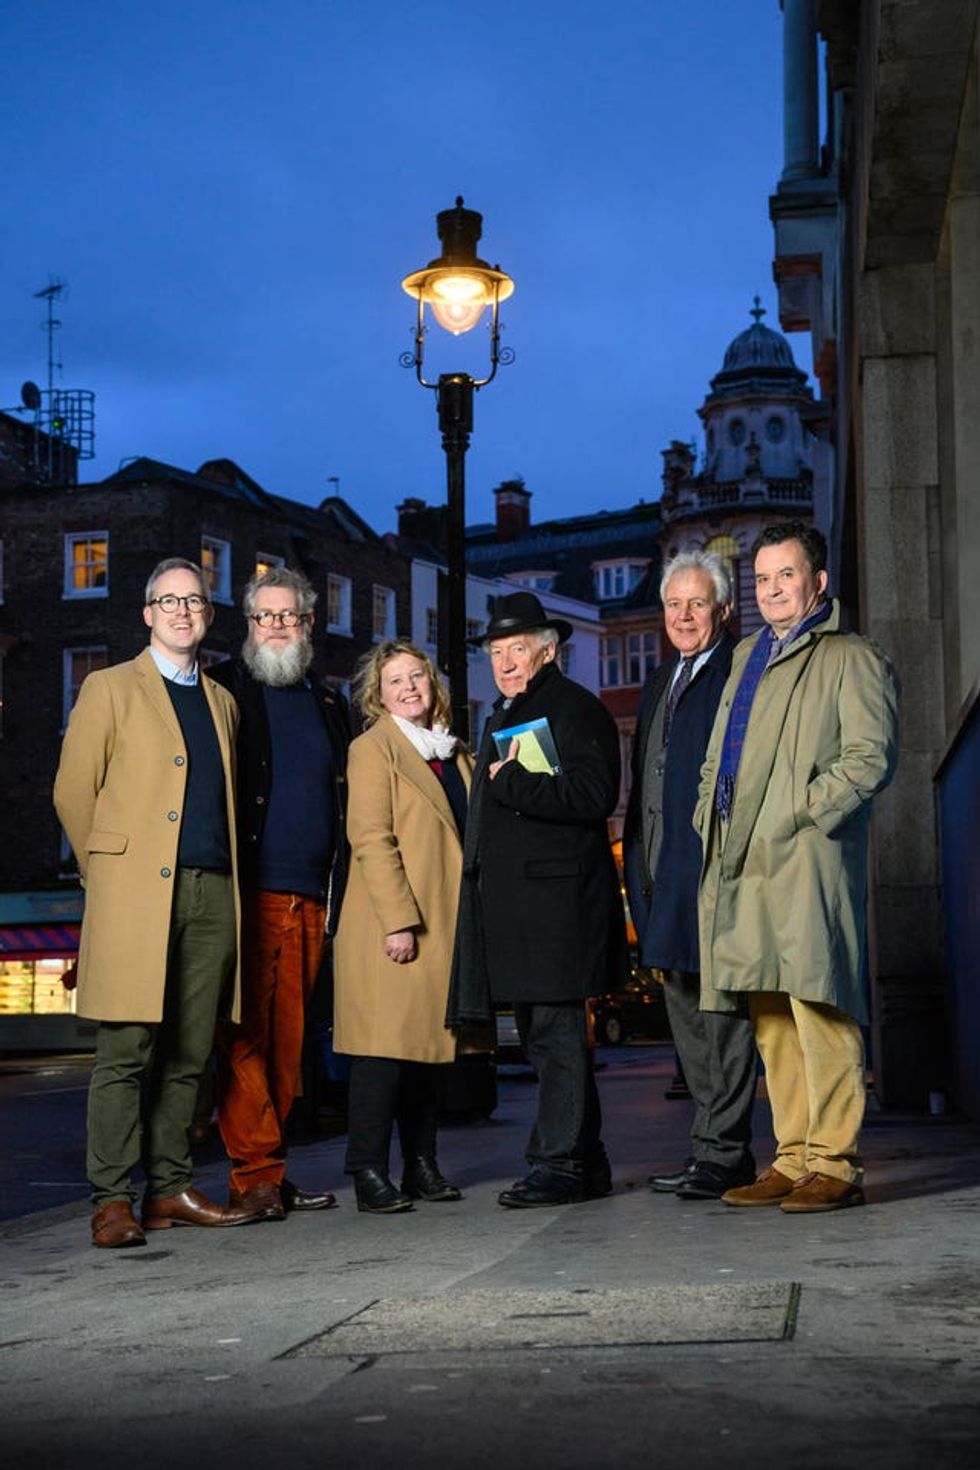 (left to right) Arts and Heritage minister Lord Parkinson, campaigner Tim Bryars, MP Nickie Aiken, actor Simon Callow, Historic England chief executive Duncan Wilson and campaigner Luke Honey stand under one of four gas lamps along Russell Street in Covent Garden, London that have today been given Grade II listing protection.